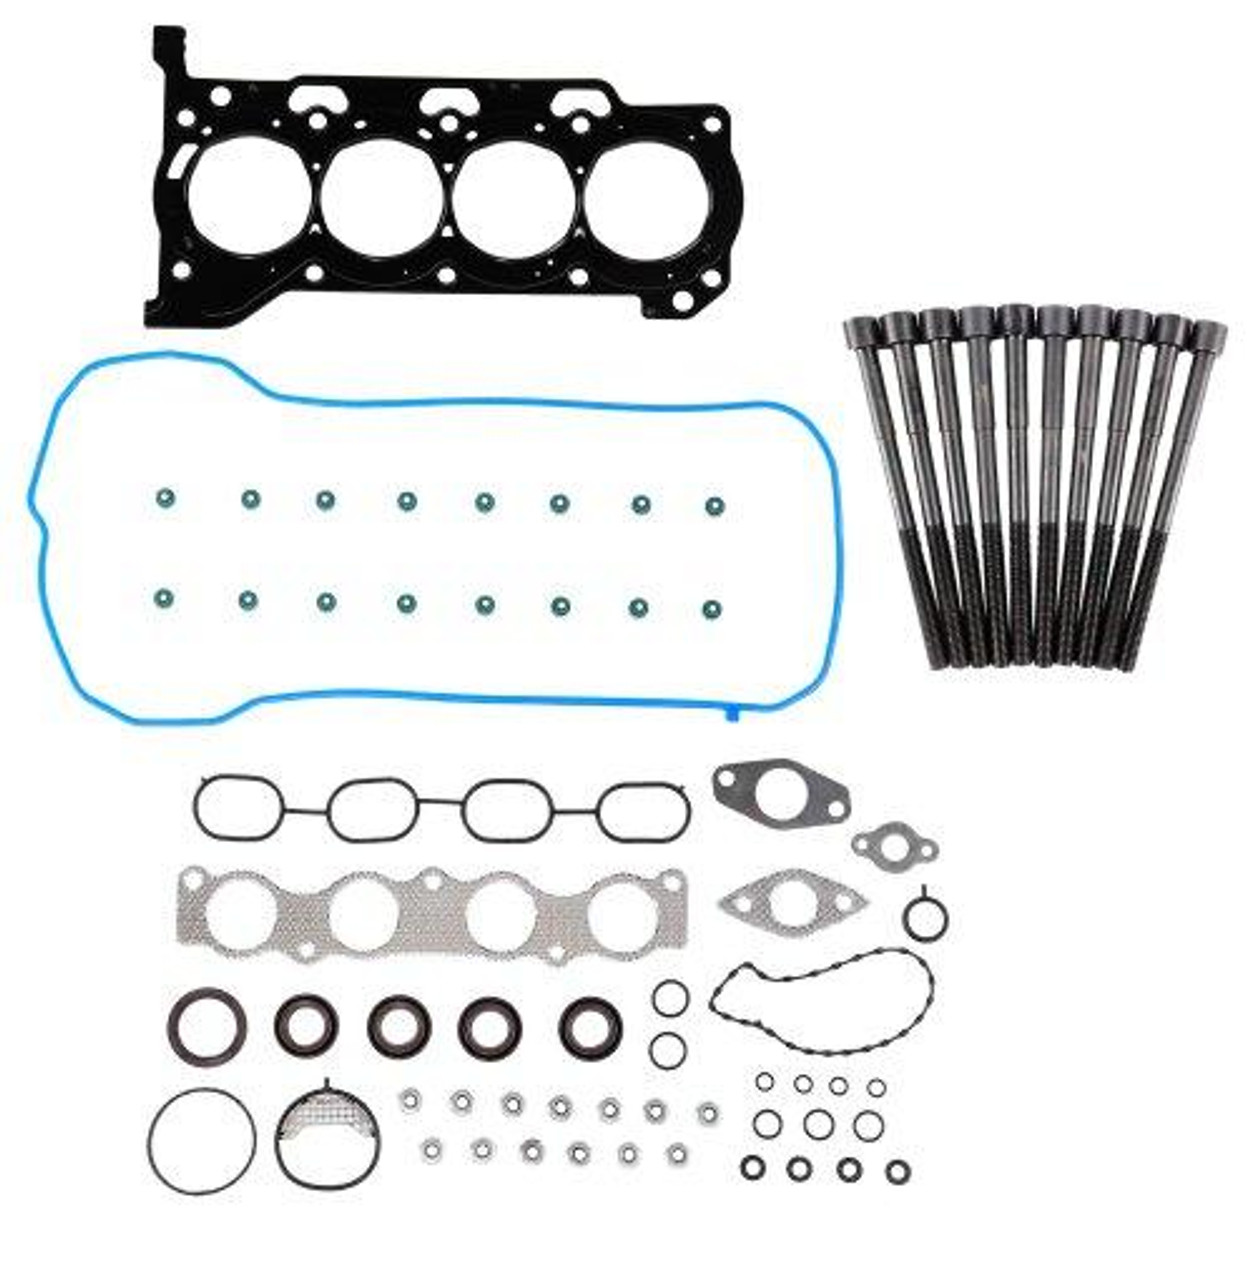 Head Gasket Set with Head Bolt Kit - 2010 Toyota Prius 1.8L Engine Parts # HGB929ZE14